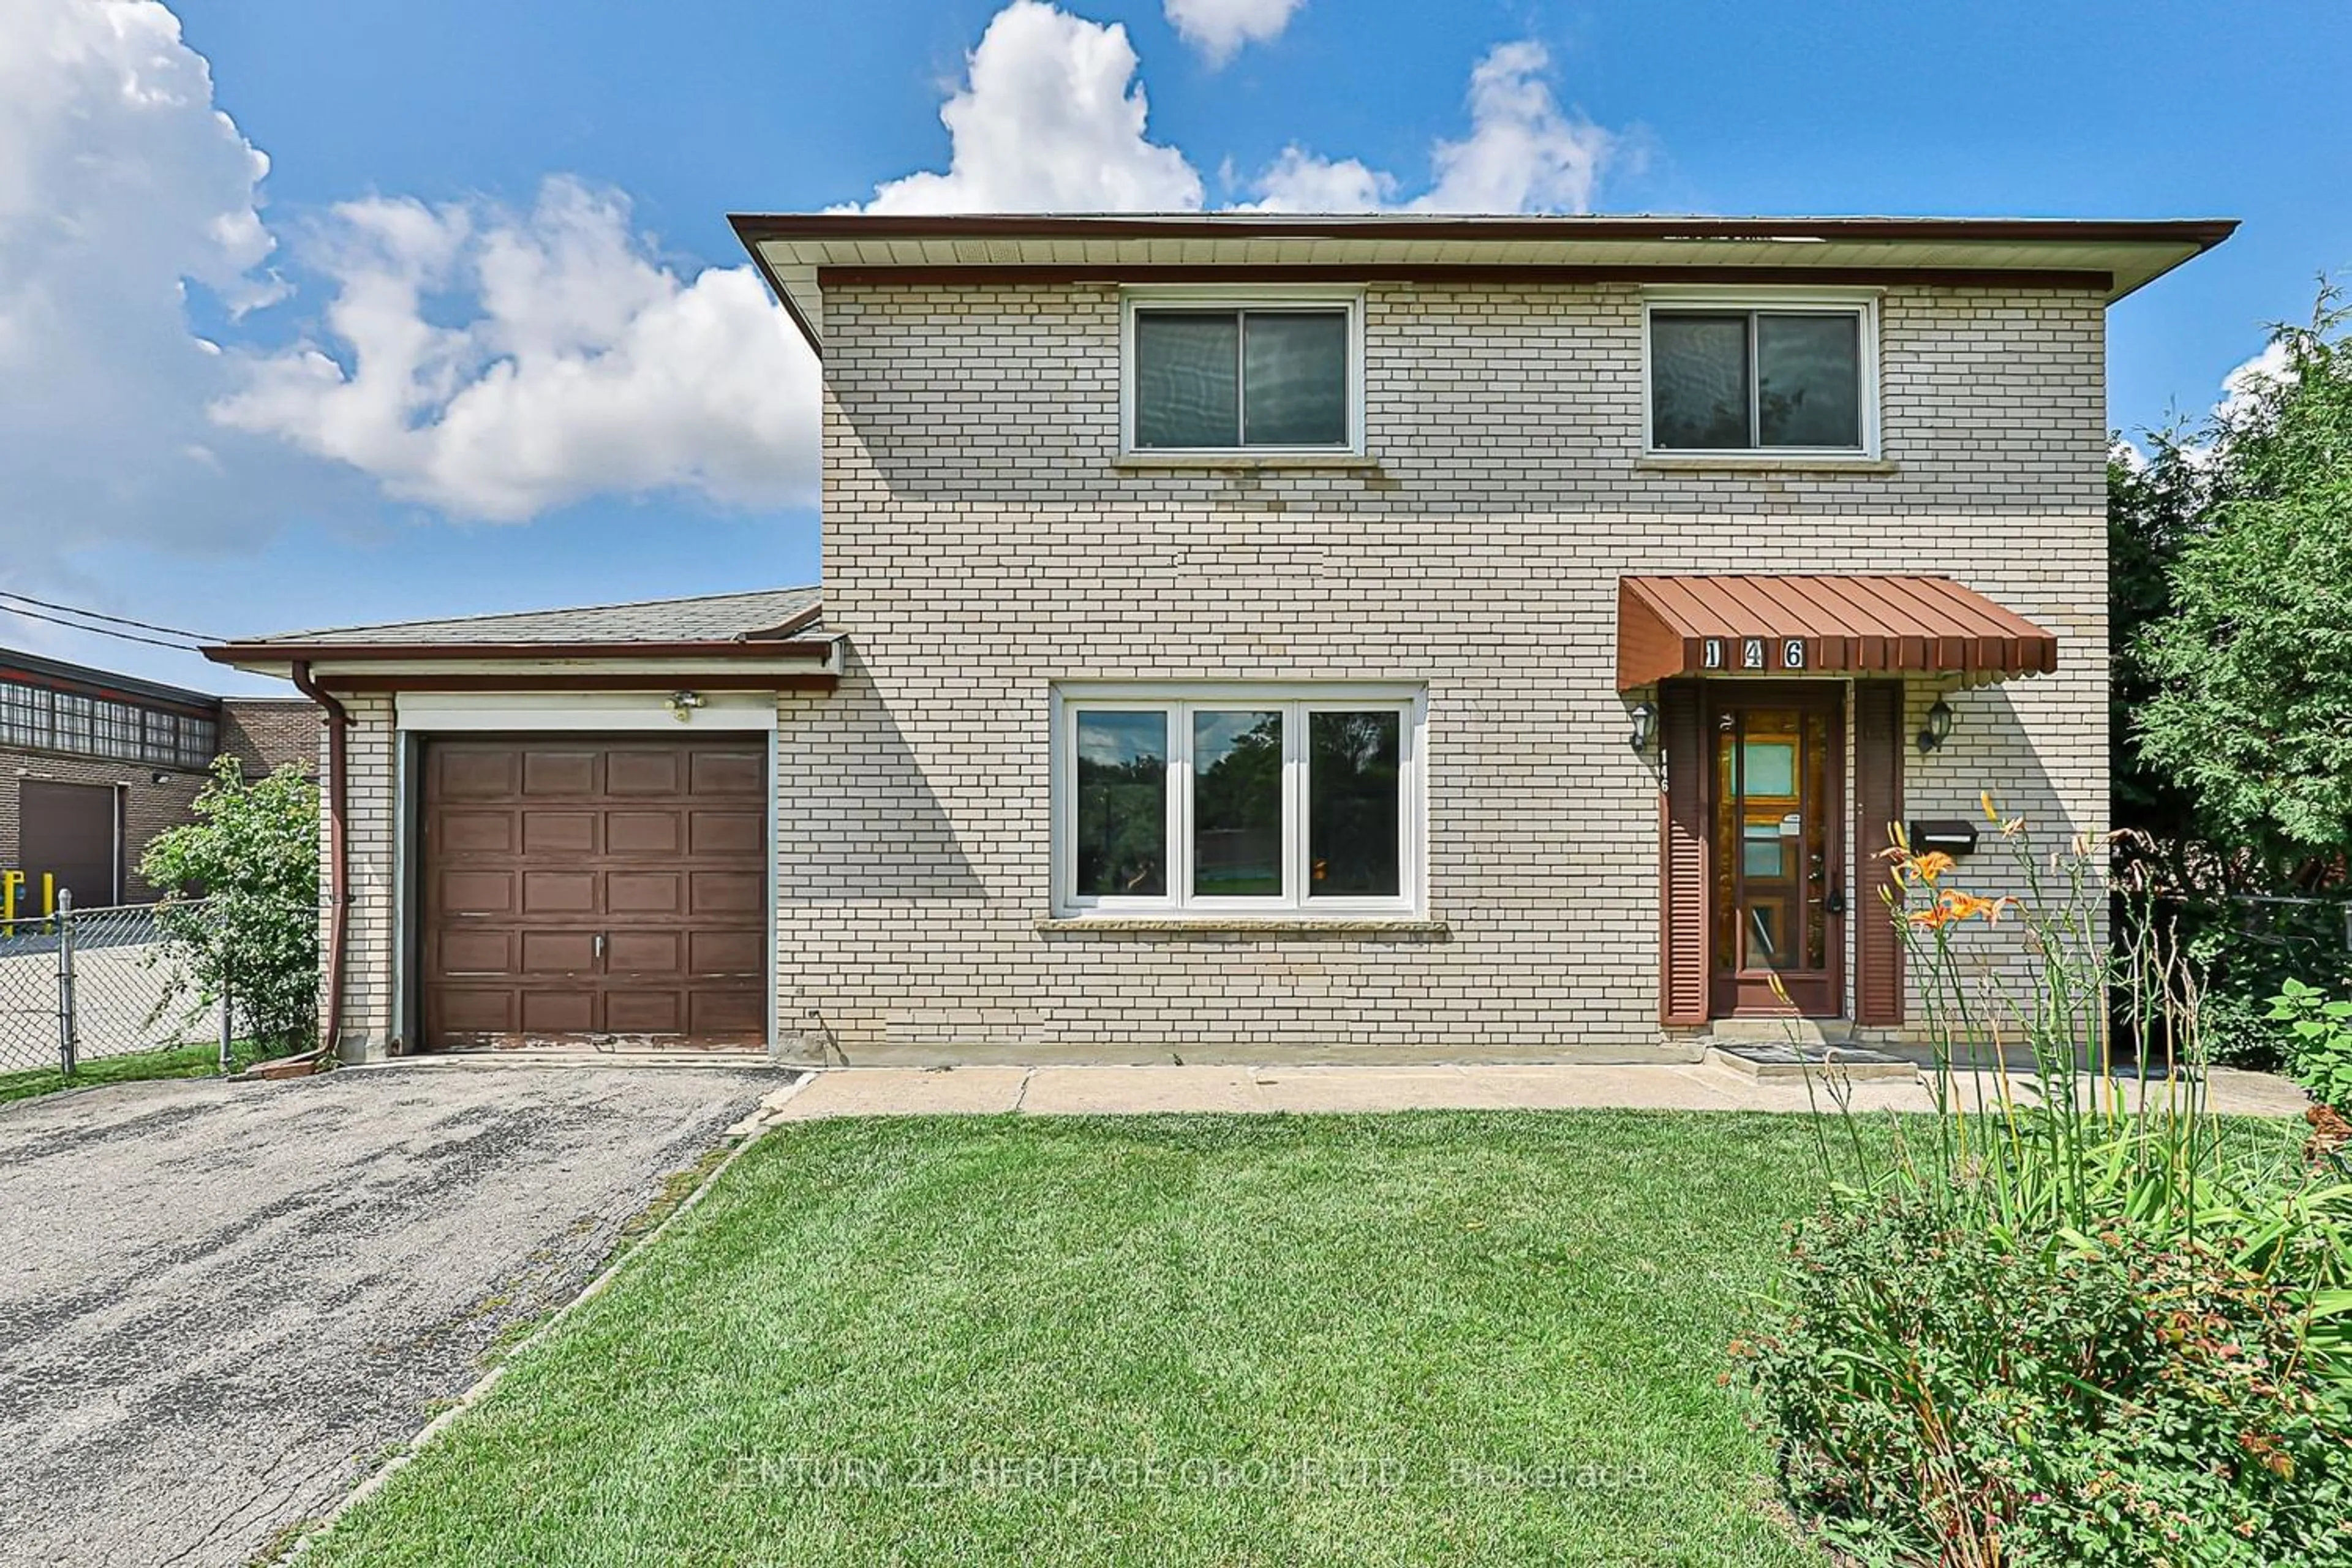 Home with brick exterior material for 146 Doncaster Ave, Markham Ontario L3T 1L3